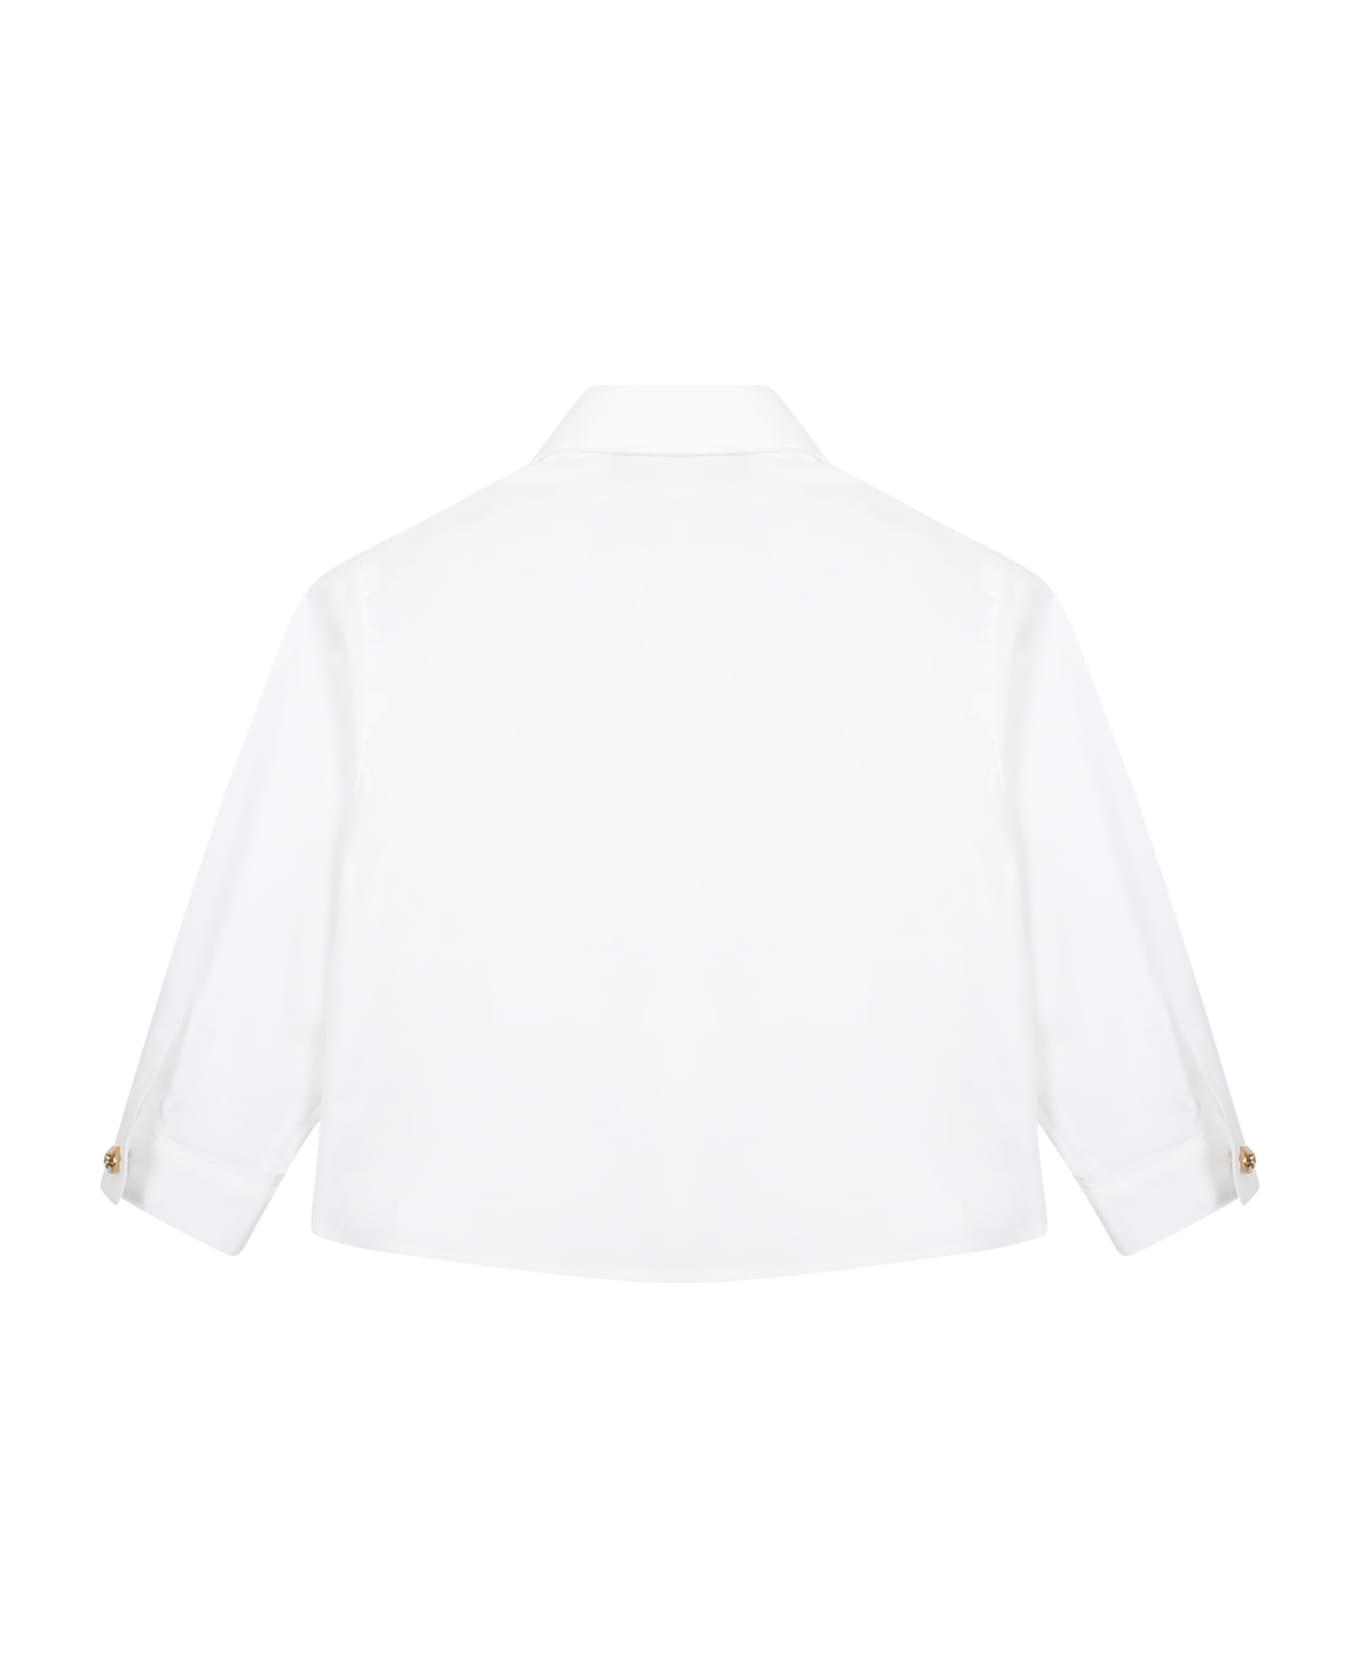 Versace White Shirt For Baby Boy With Iconic Medusa - White シャツ